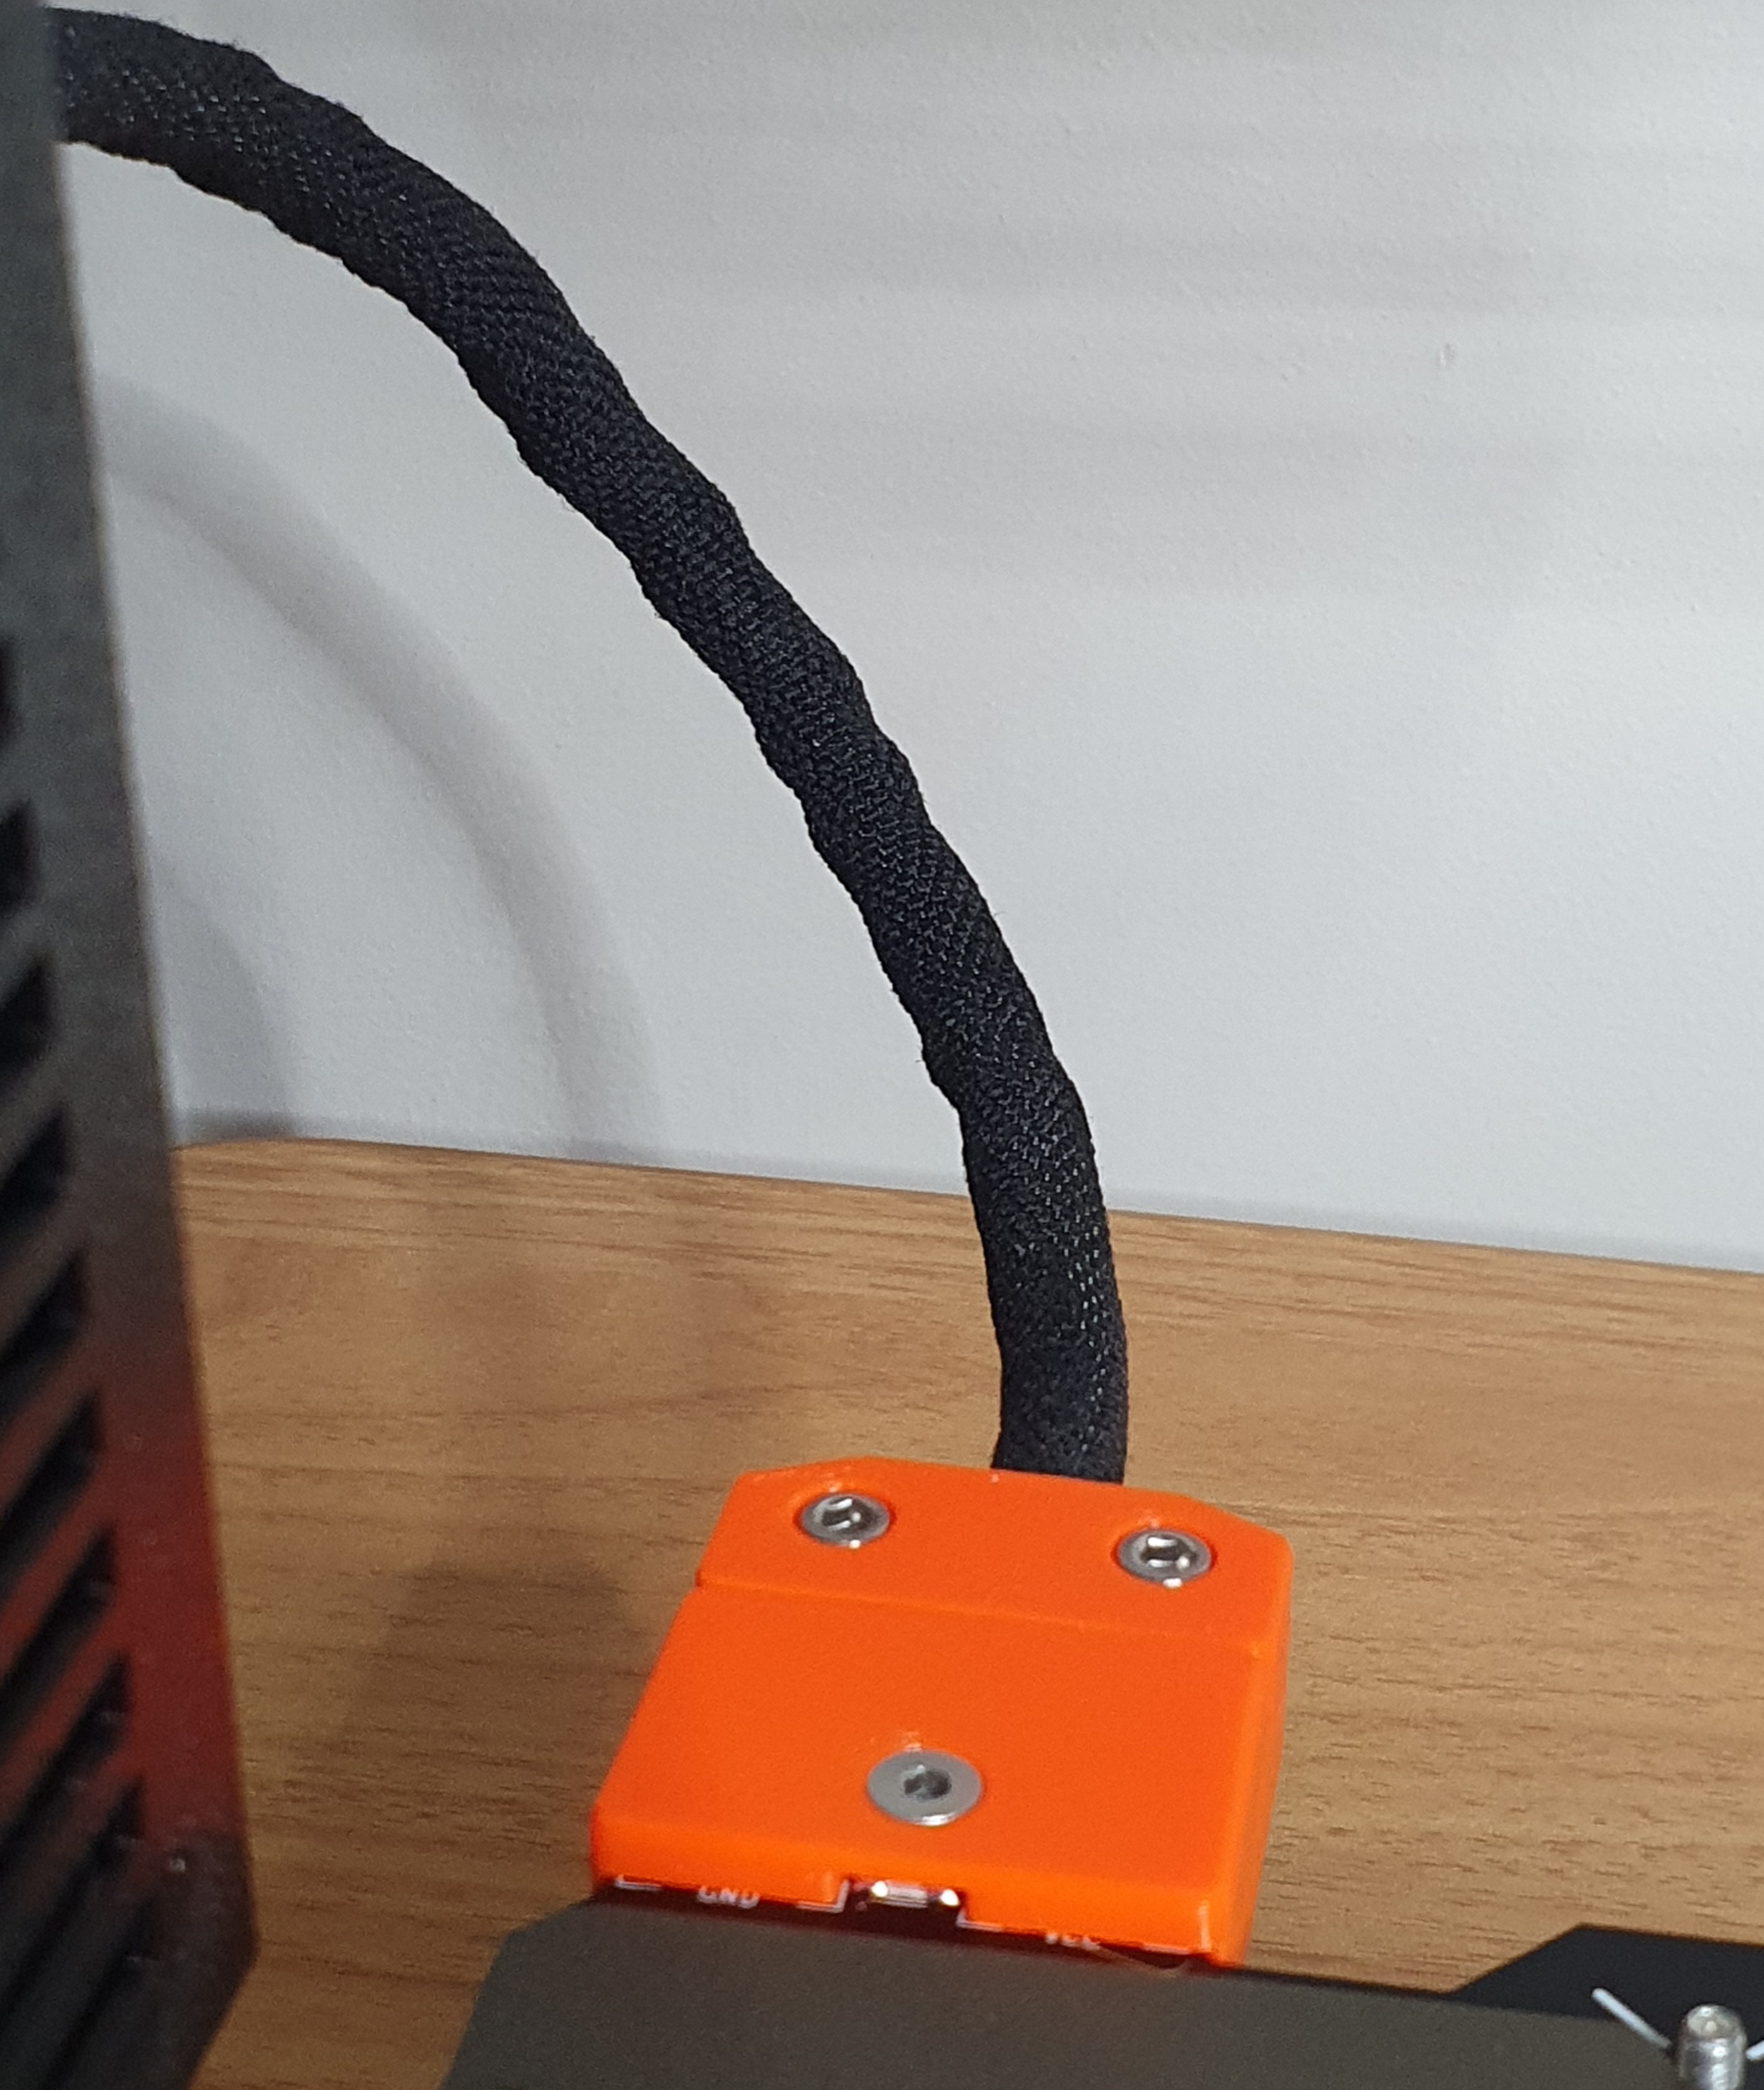 MK3S heat-bed cable cover with reduced 3mm height profile to allow clearance for extruder rear-mounted endoscope